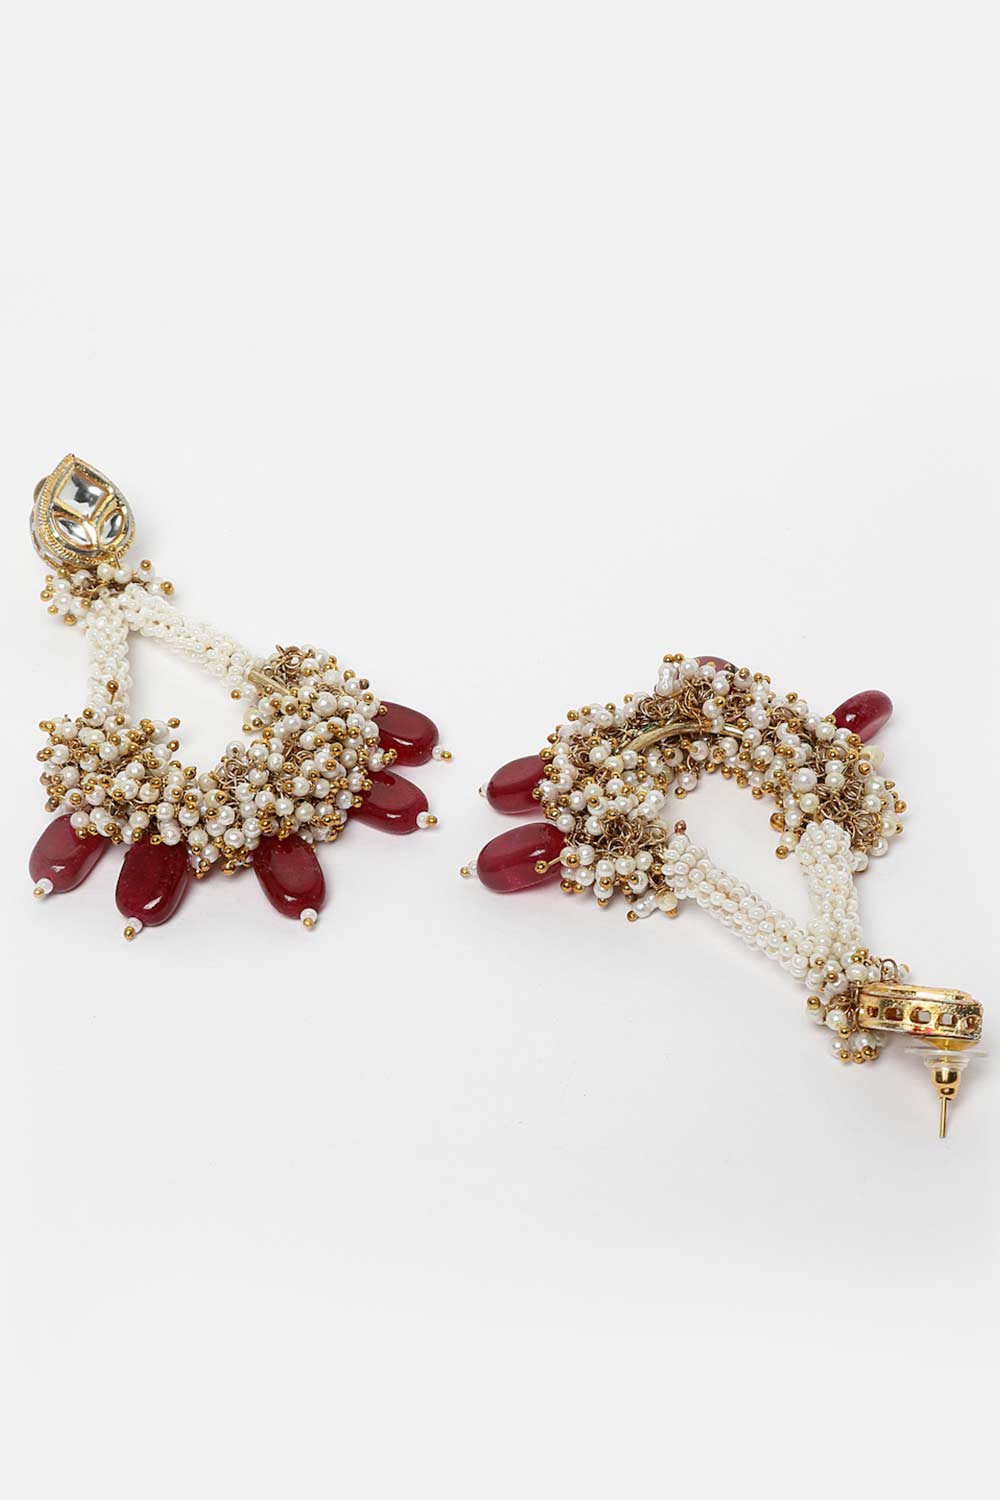 Red And Gold Gold-Plated Kundan And Pearls Chandbali Earrings